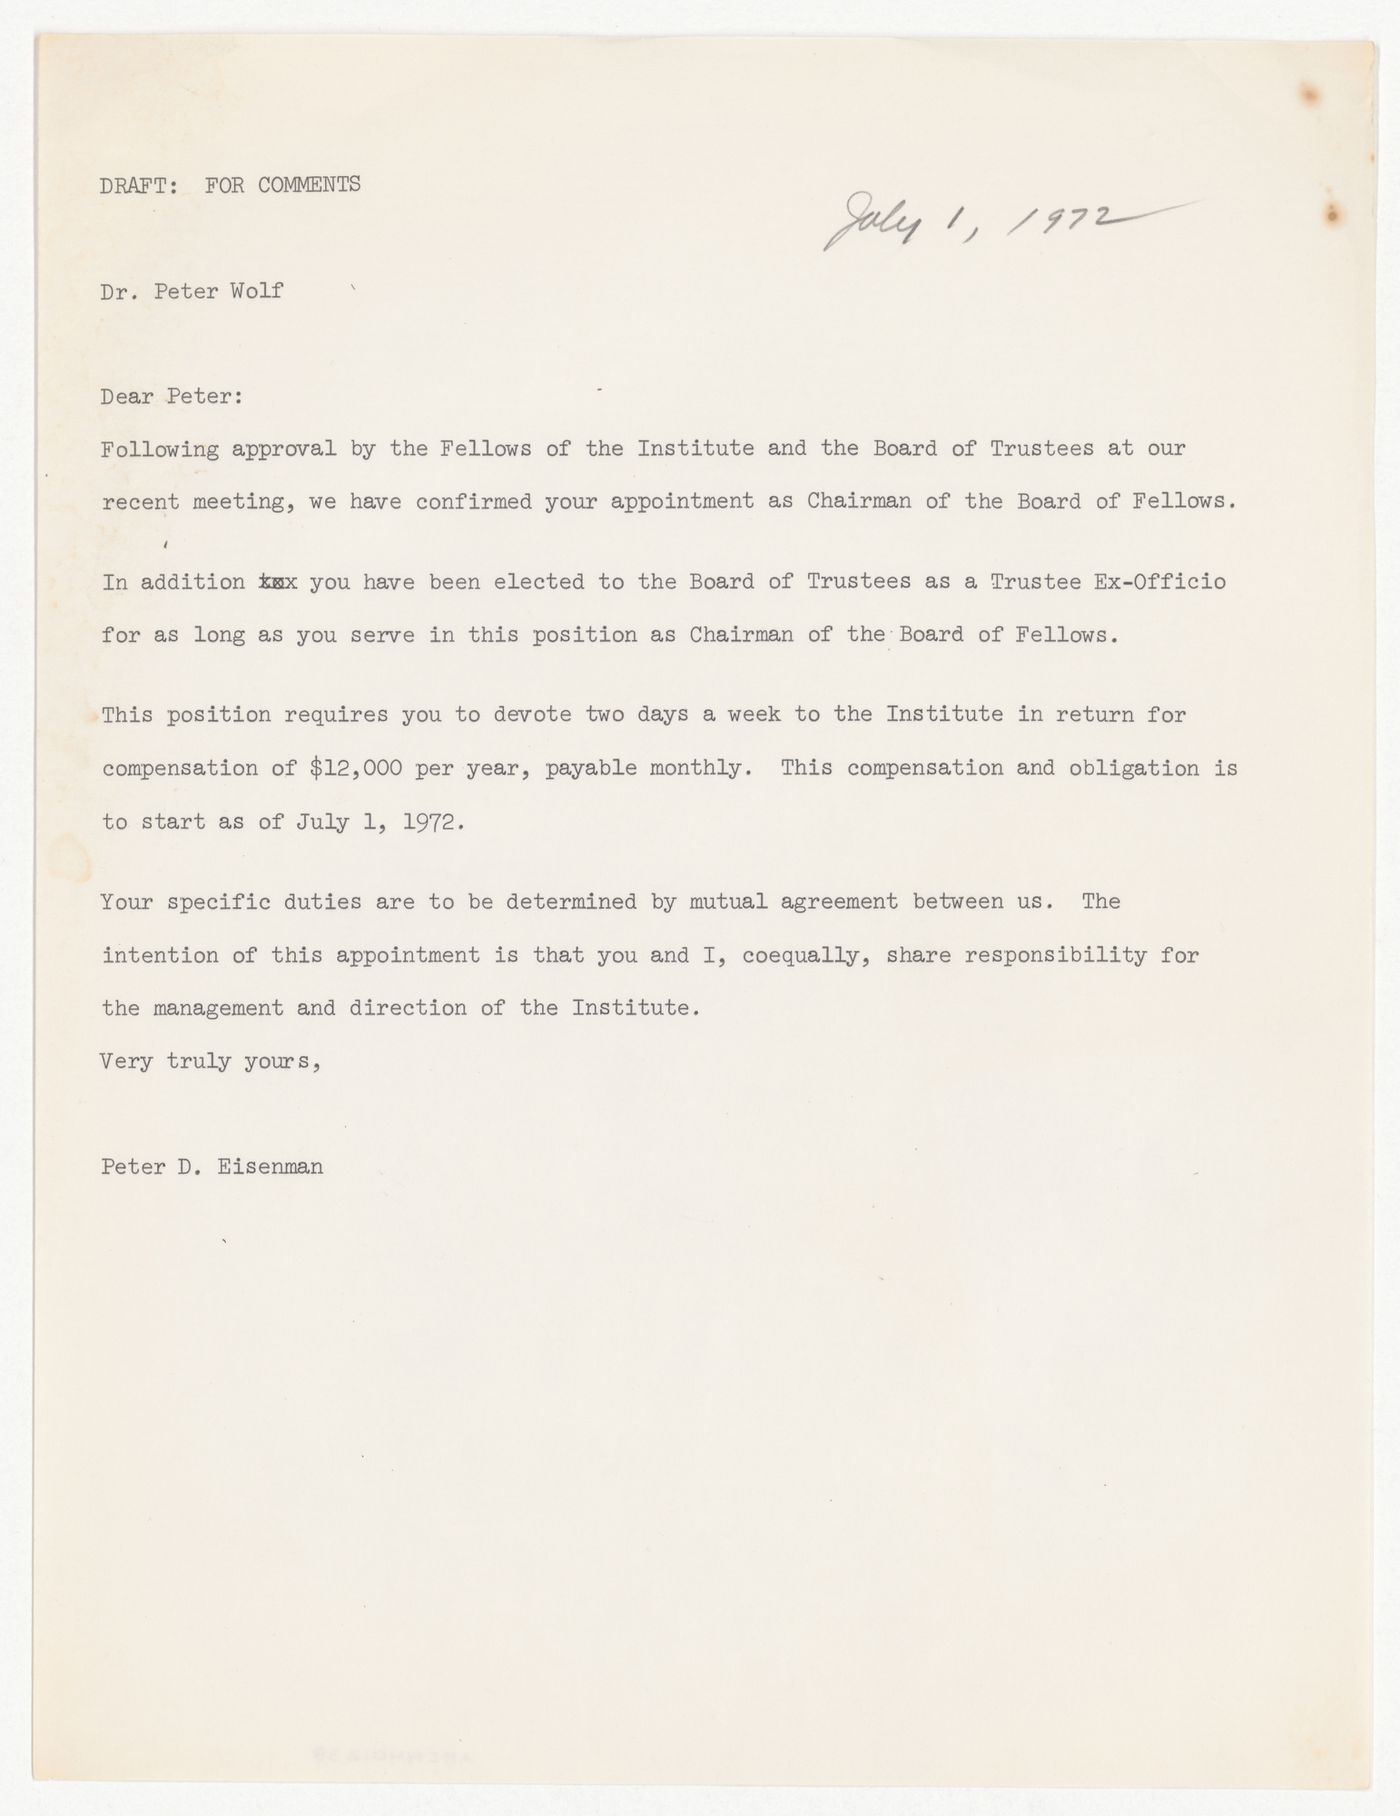 Draft letter from Peter D. Eisenman to Peter Wolf confirming Wolf's appointment as Chairman of the Board of Fellows